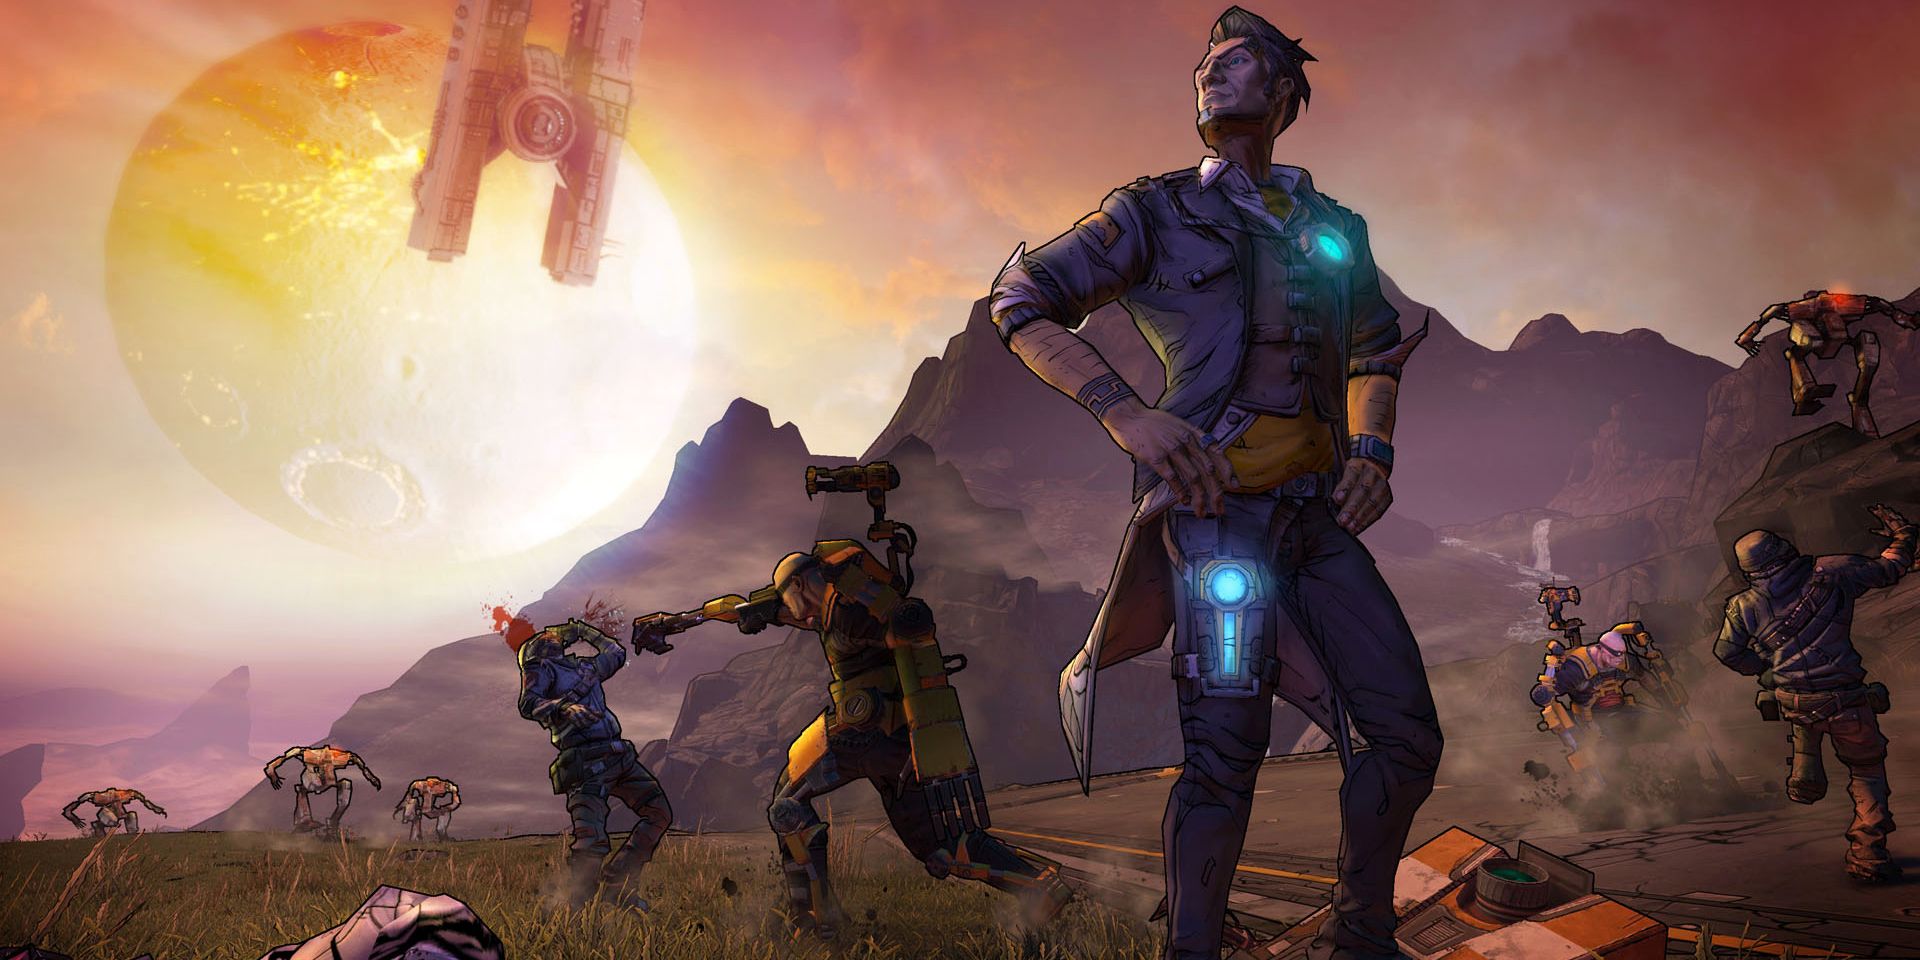 Handsome Jack standing tall while background chaos ensues in Borderlands 2